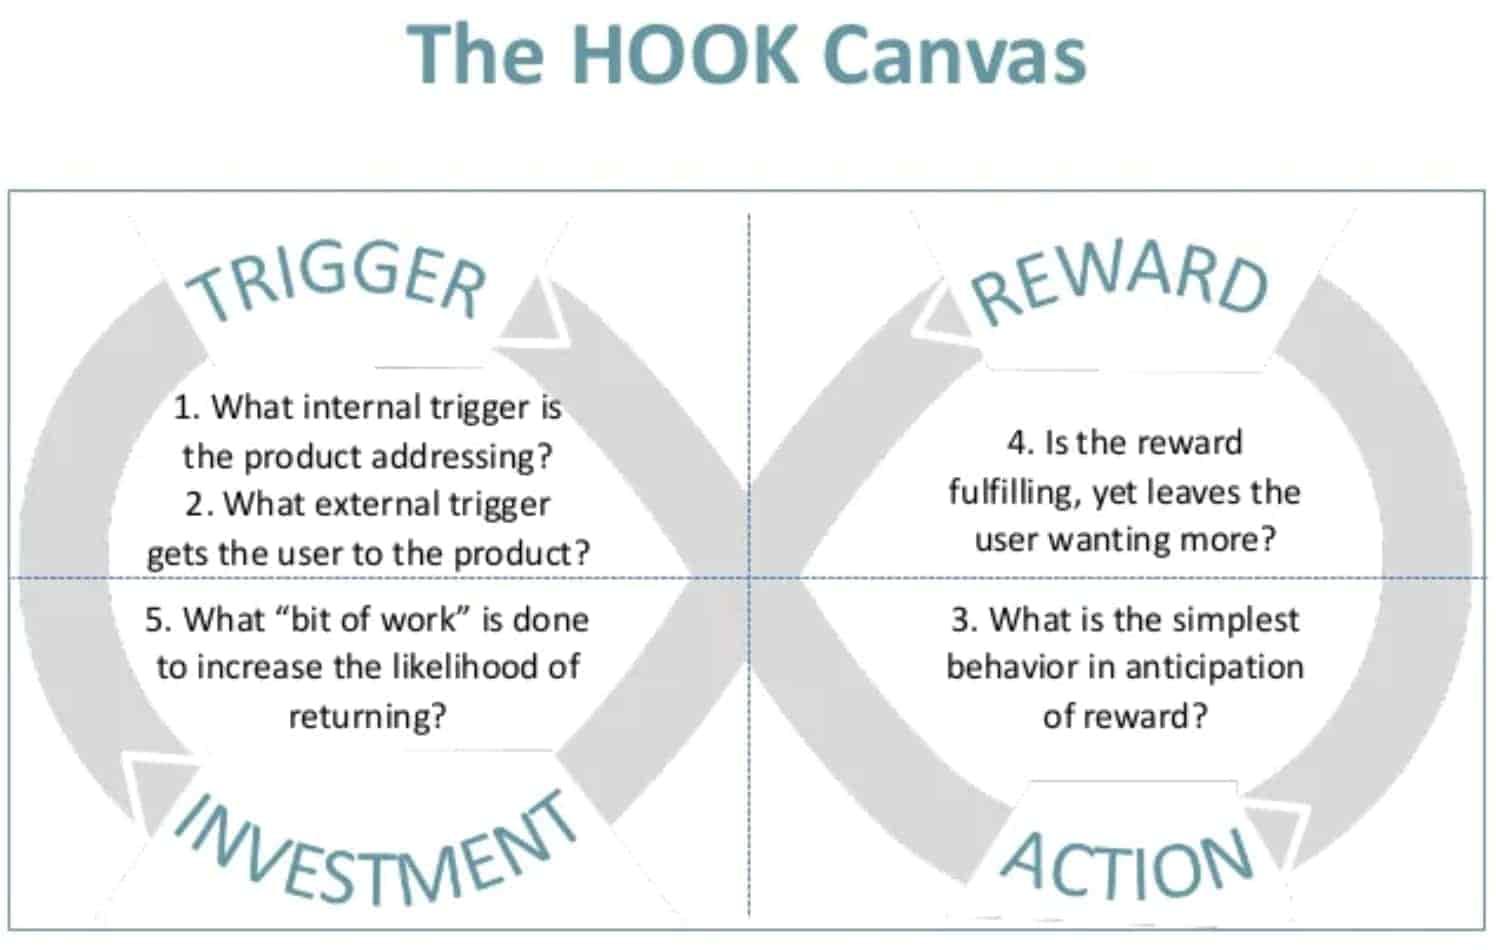 Source: The Hook Model: How to Manufacture Desire in 4 Steps